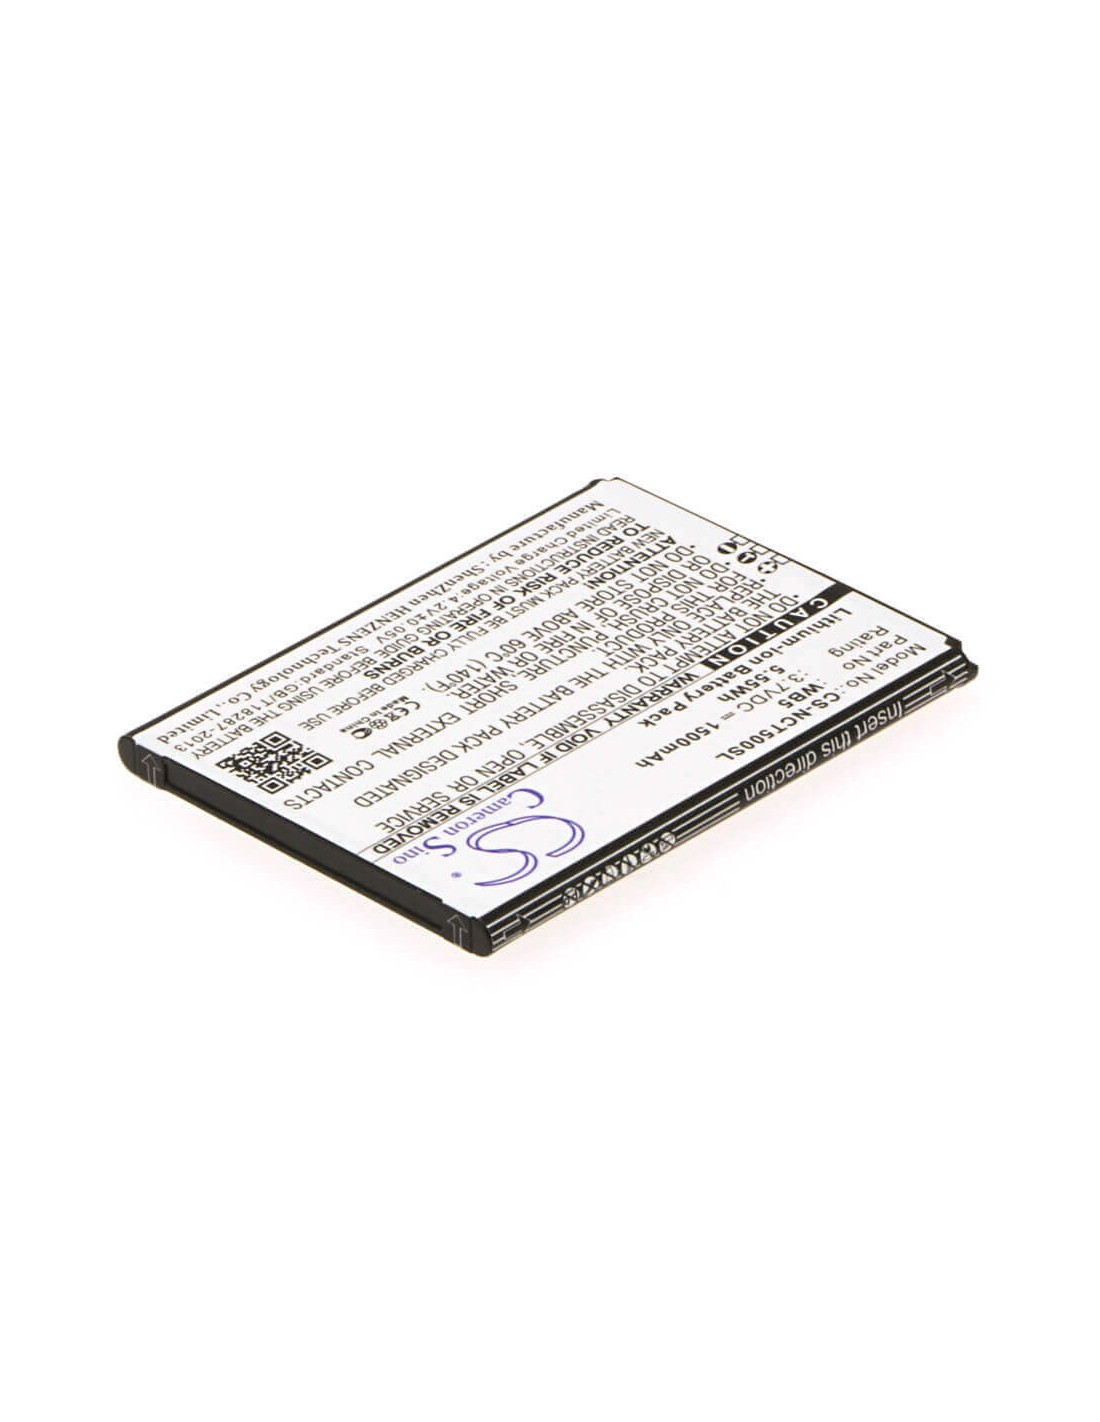 Battery for INQ Cloud Touch 3.7V, 1500mAh - 5.55Wh